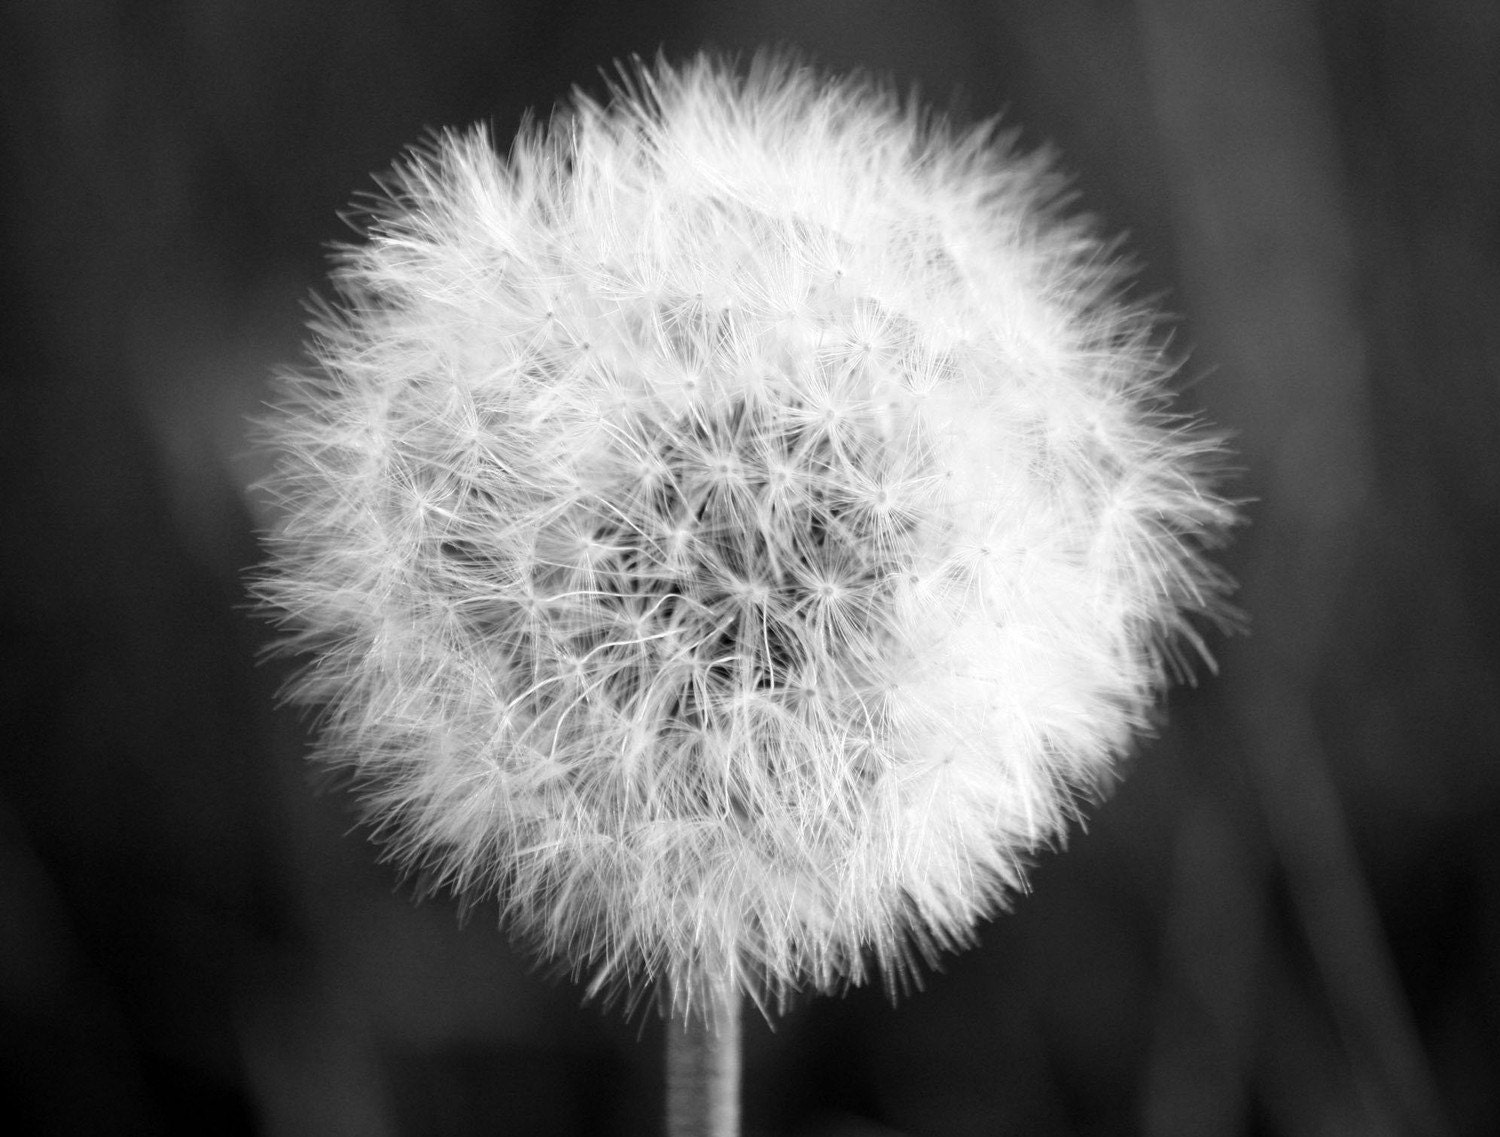 Hanging On - Fine Art Photograph Black and White Nature Flower Dandelion - 5x7 Free Shipping - OneDecember